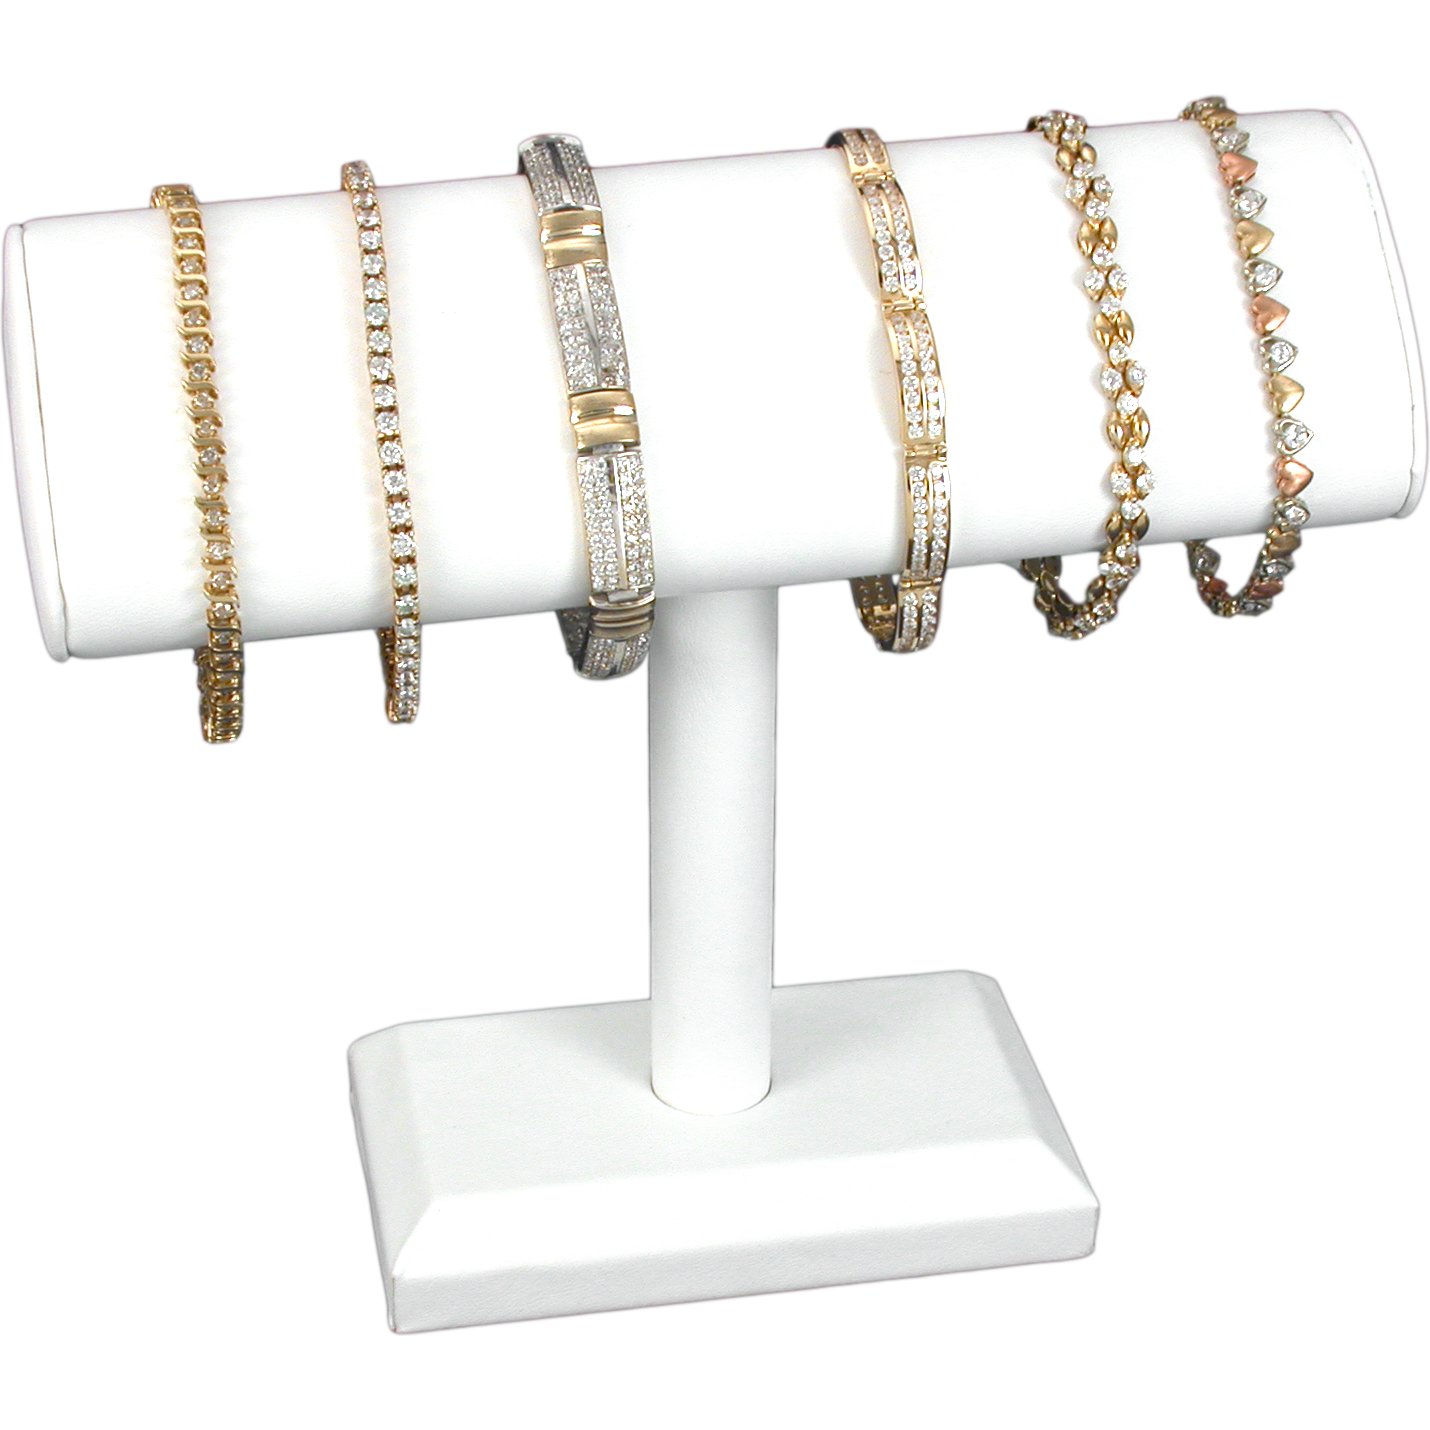 White Oval T-Bar Bangle Bracelet Watch Display Stand